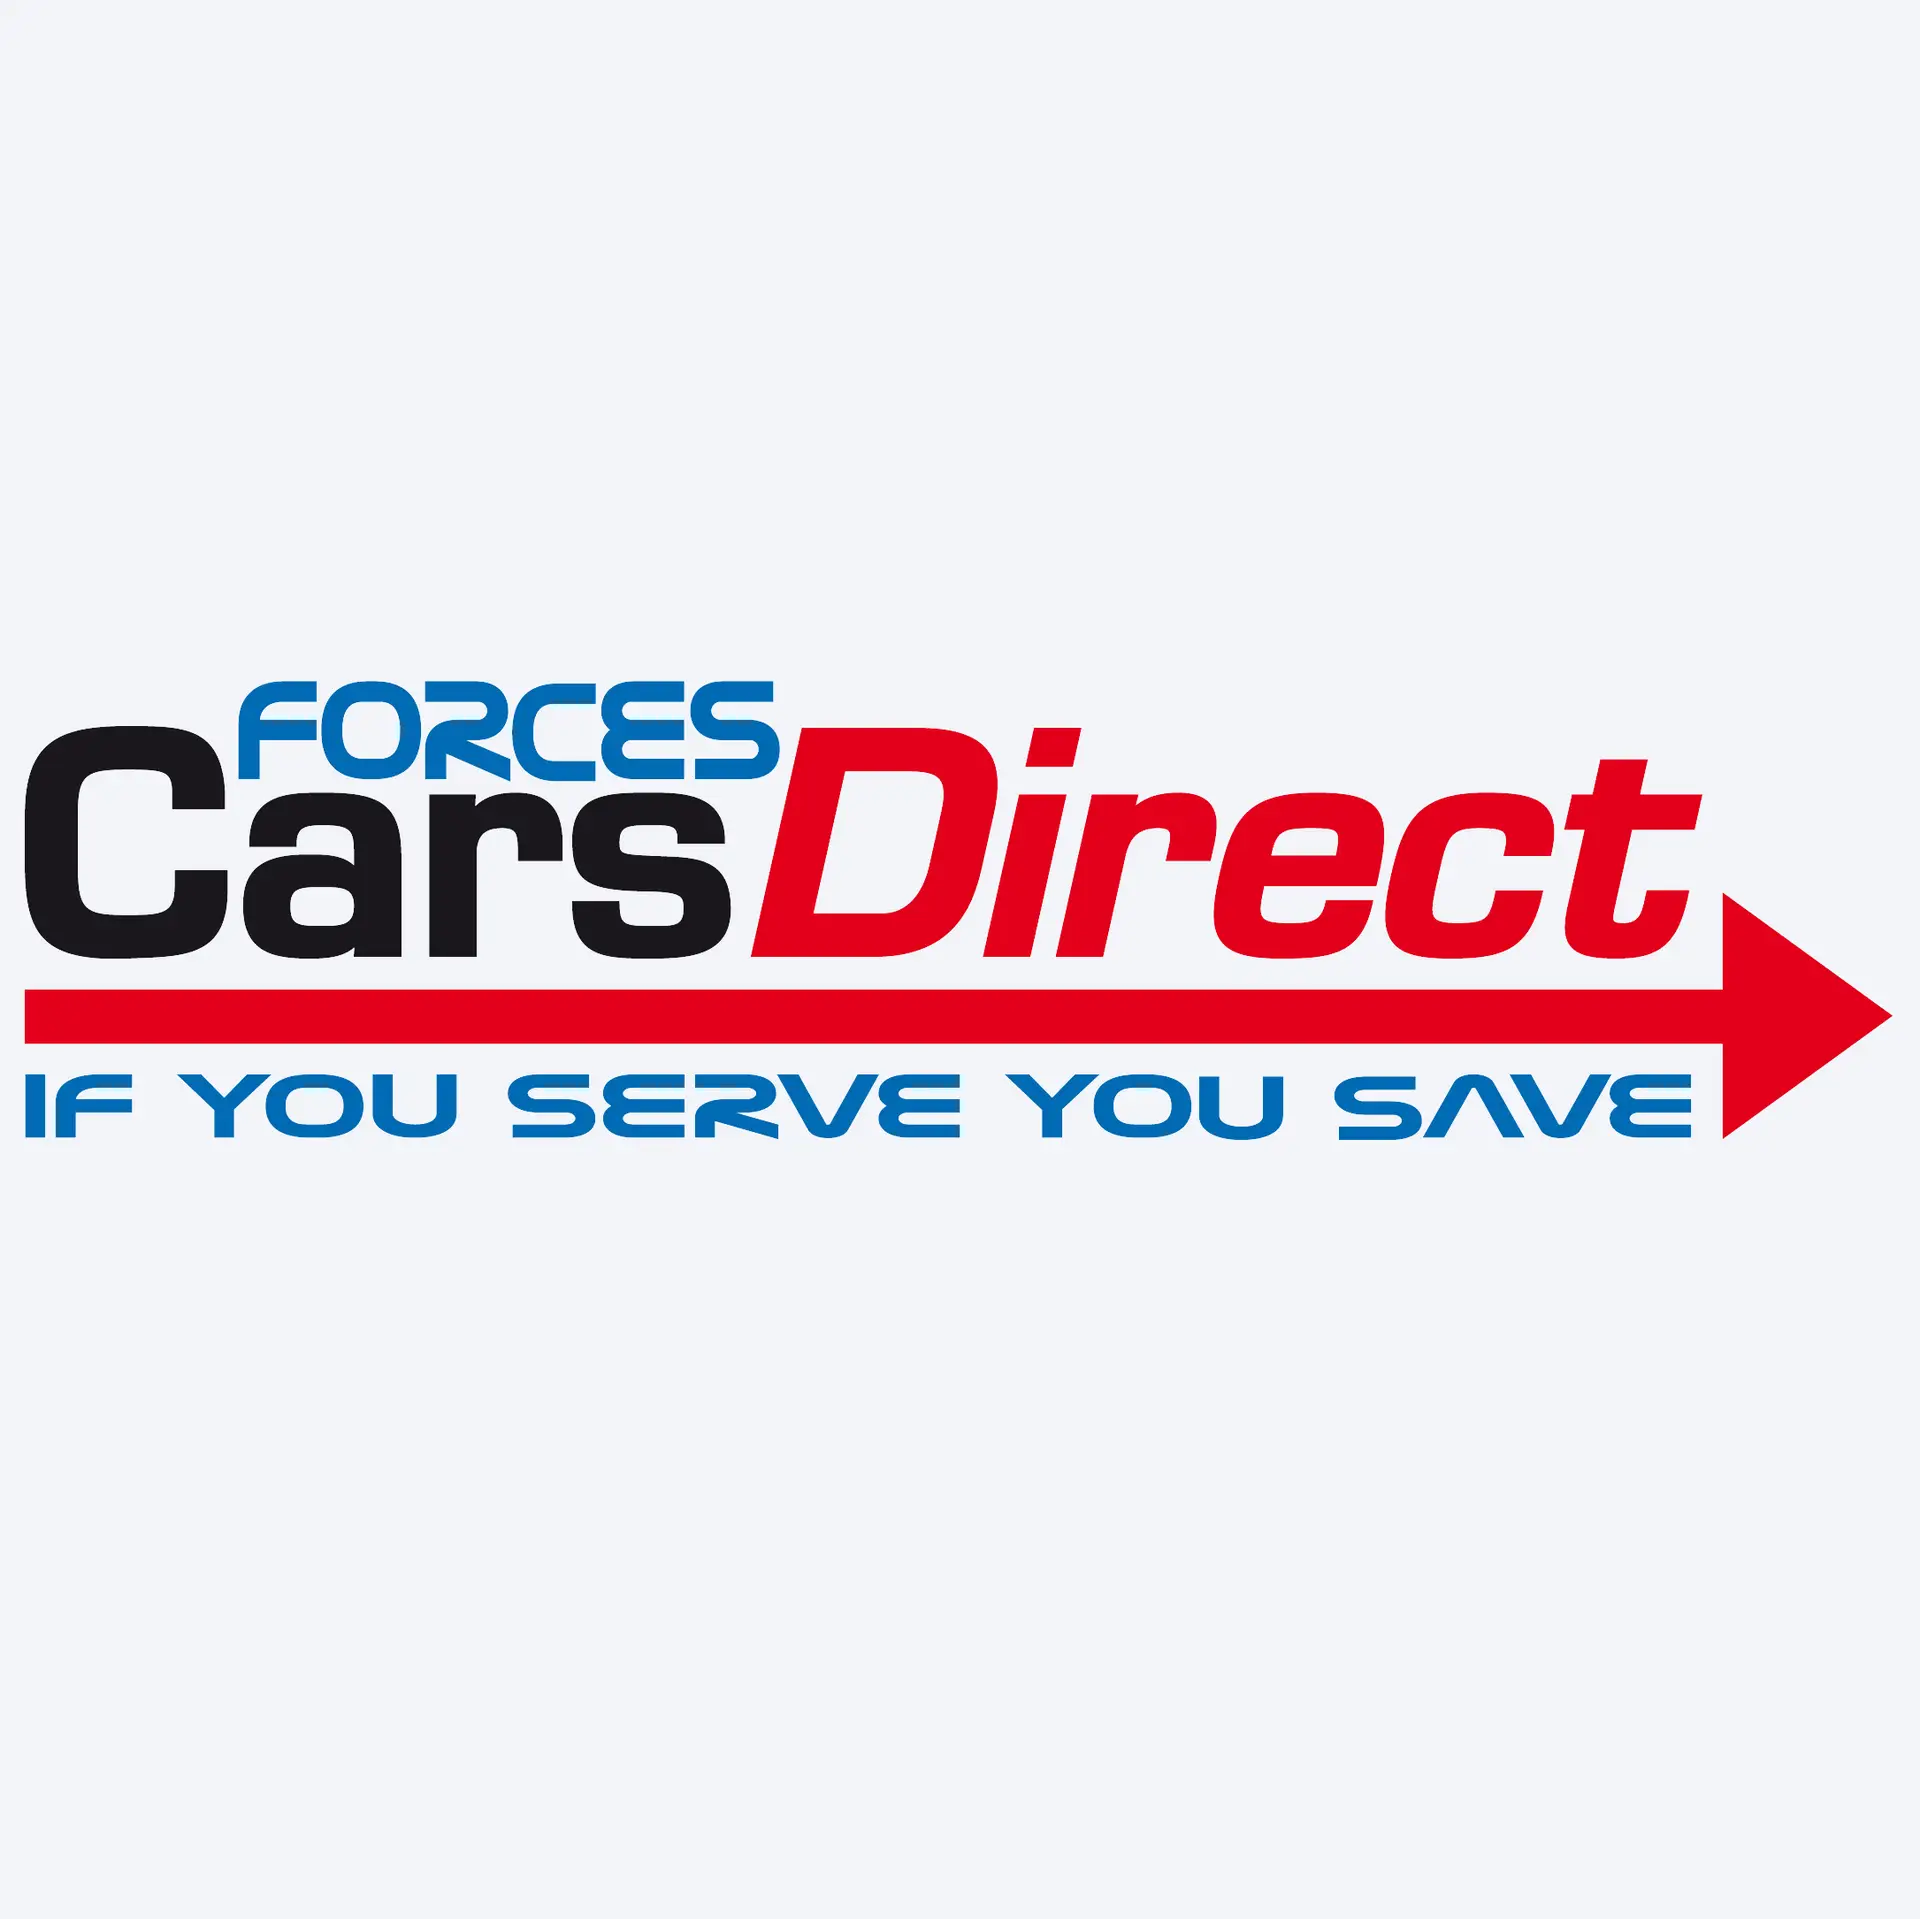 <p><strong>Save</strong> with Forces Cars Direct</p>